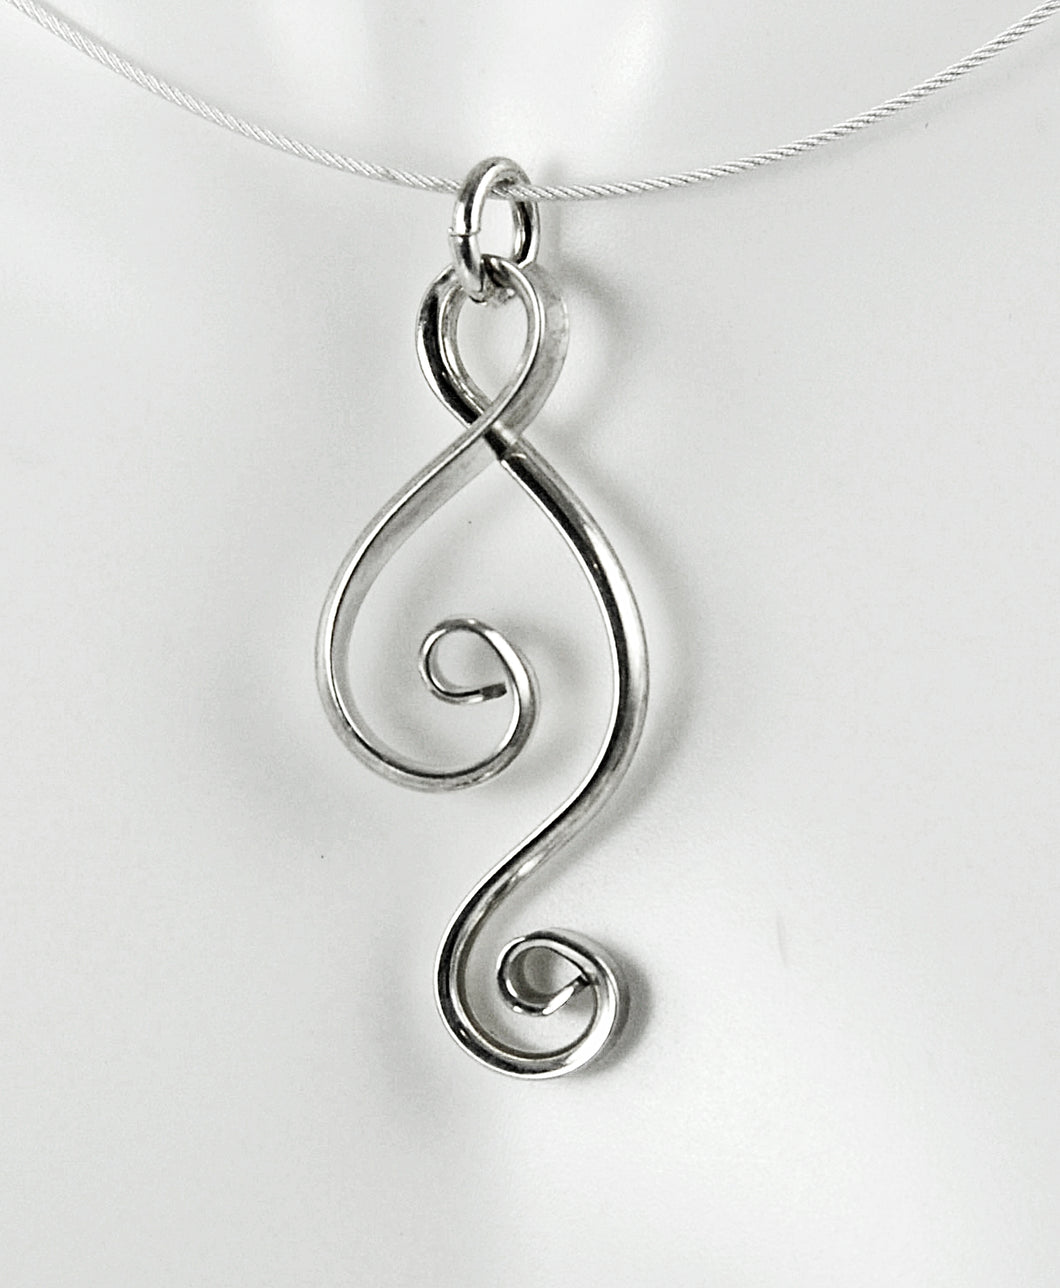 Argentium Sterling Silver Spiral Ketta Pendant, Shiny Silver Double Spiral Necklace, SN11 , Lois Linn Jewelry